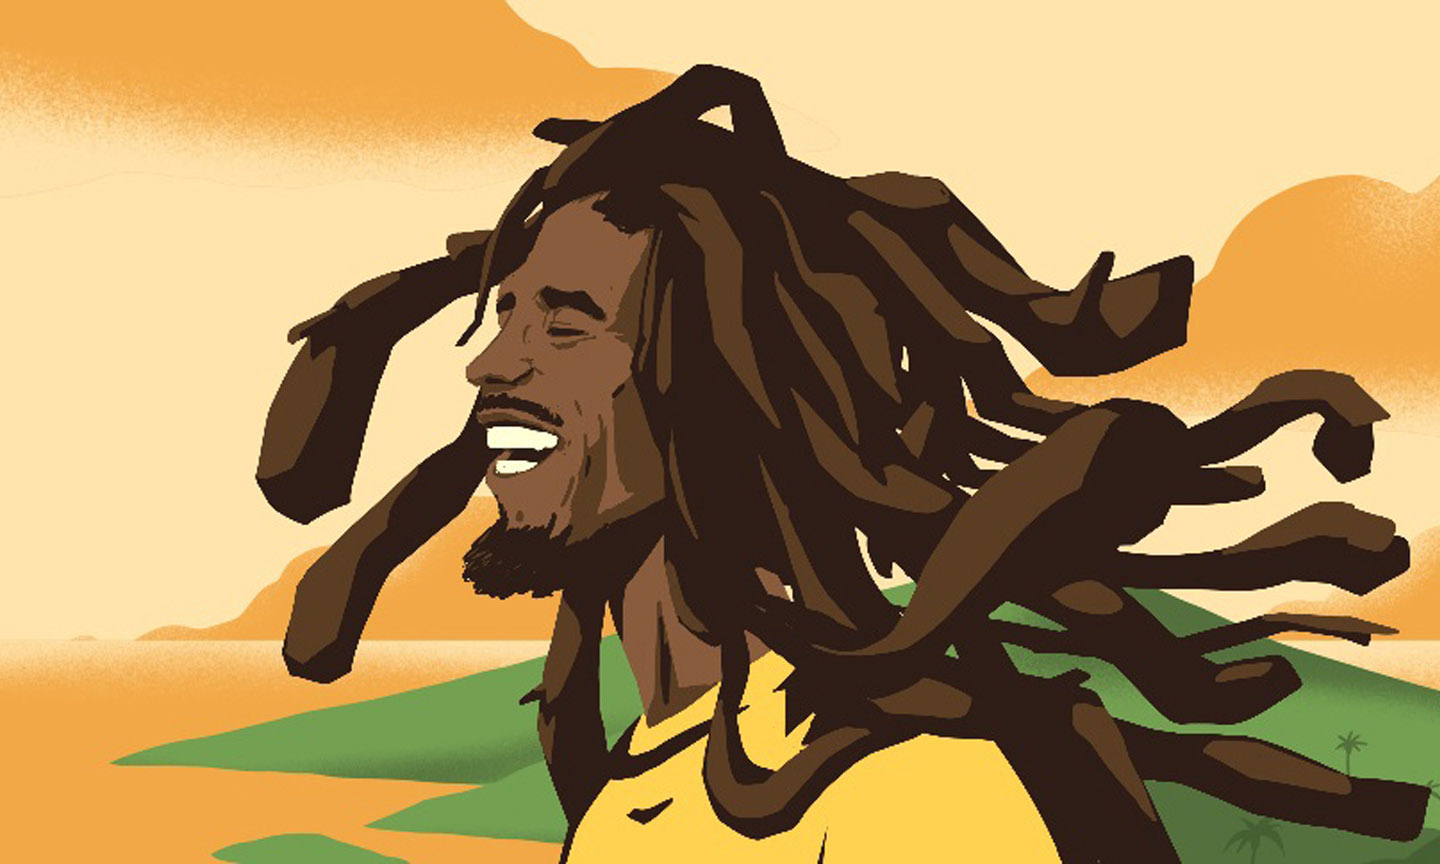 Bob Marley Honored With New Animated Video For Could You Be Loved